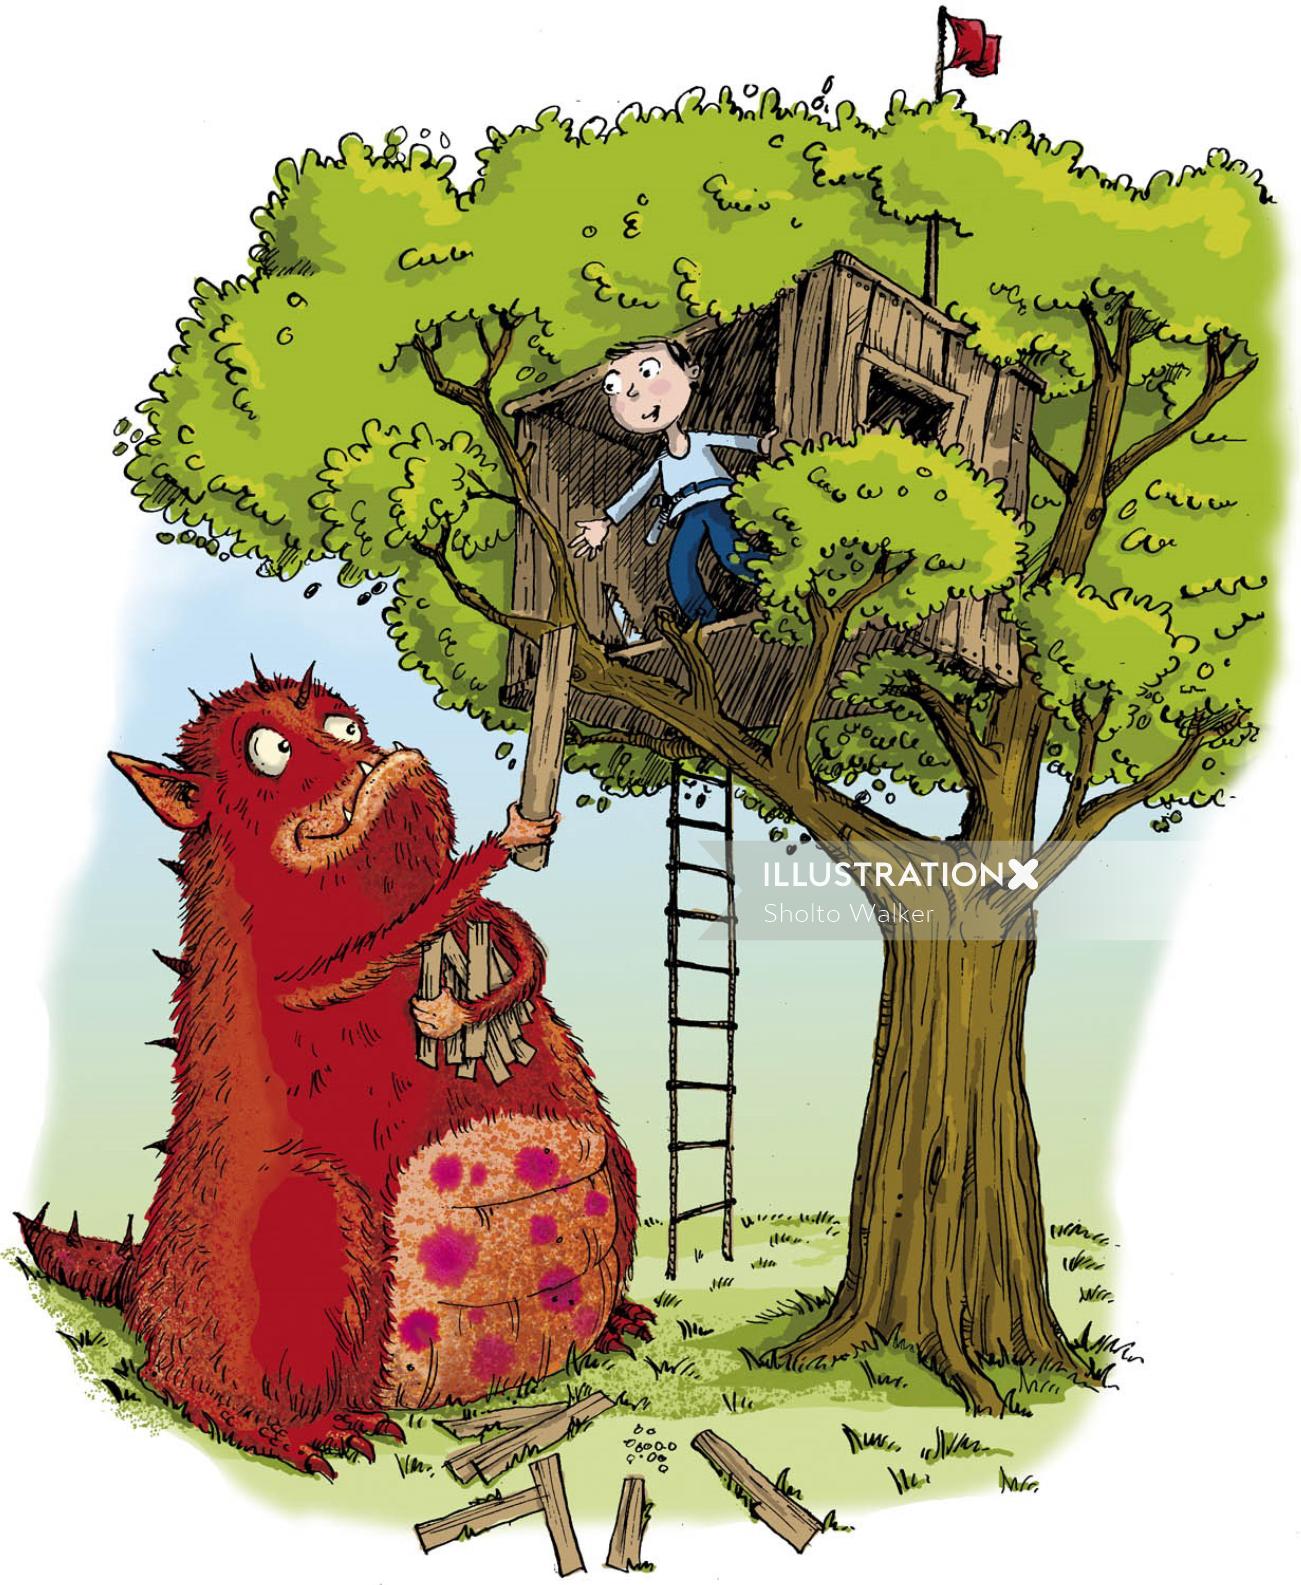 Boy and monster building a tree house - Cartoon illustration by Sholto Walker